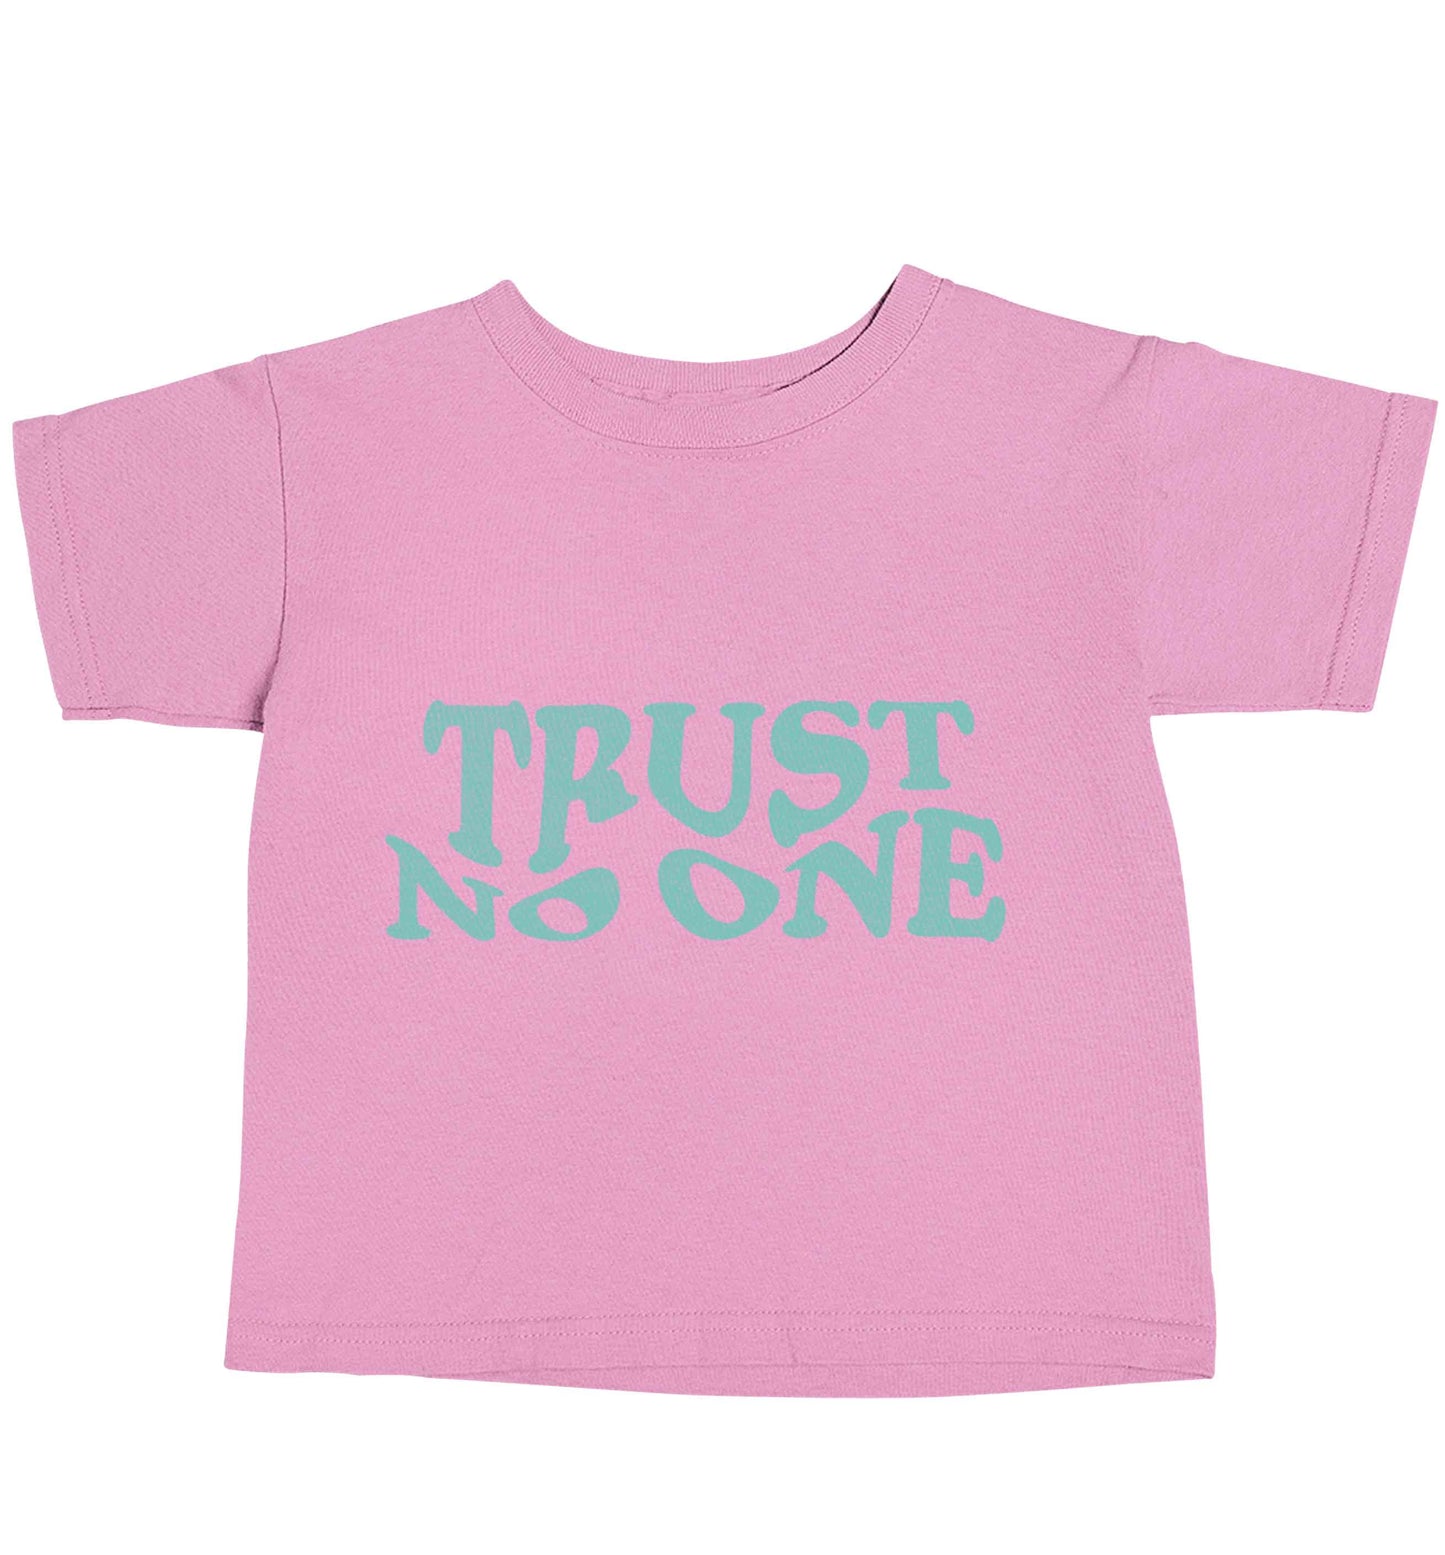 Trust no one light pink baby toddler Tshirt 2 Years